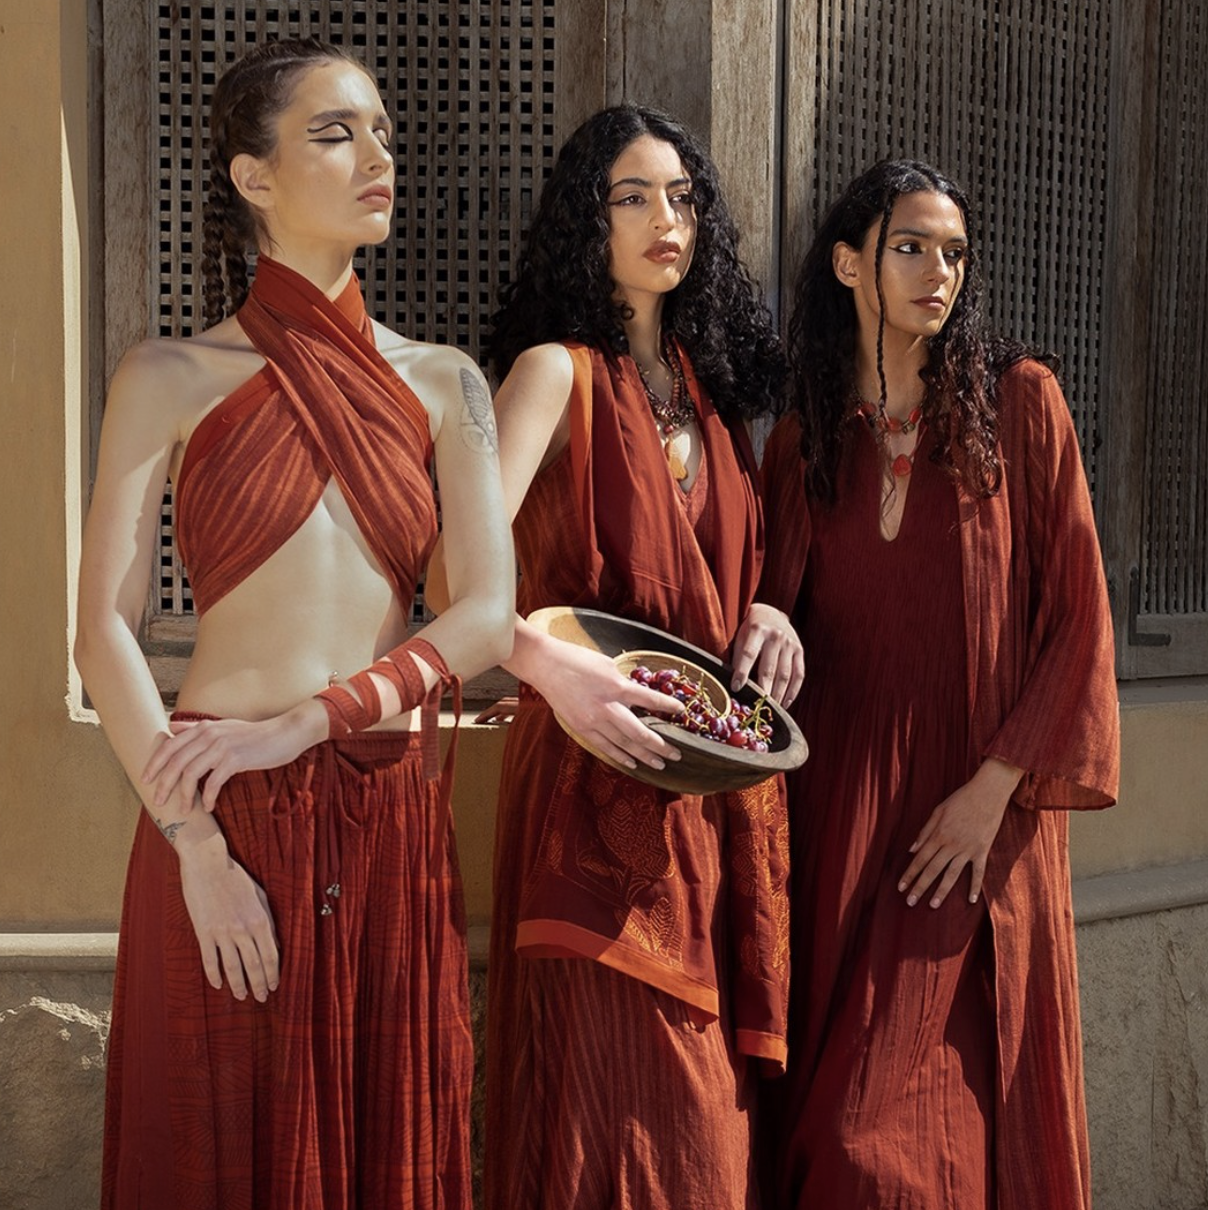 The Egyptian Fashion & Design Council presents the first-ever Egypt Fashion Week